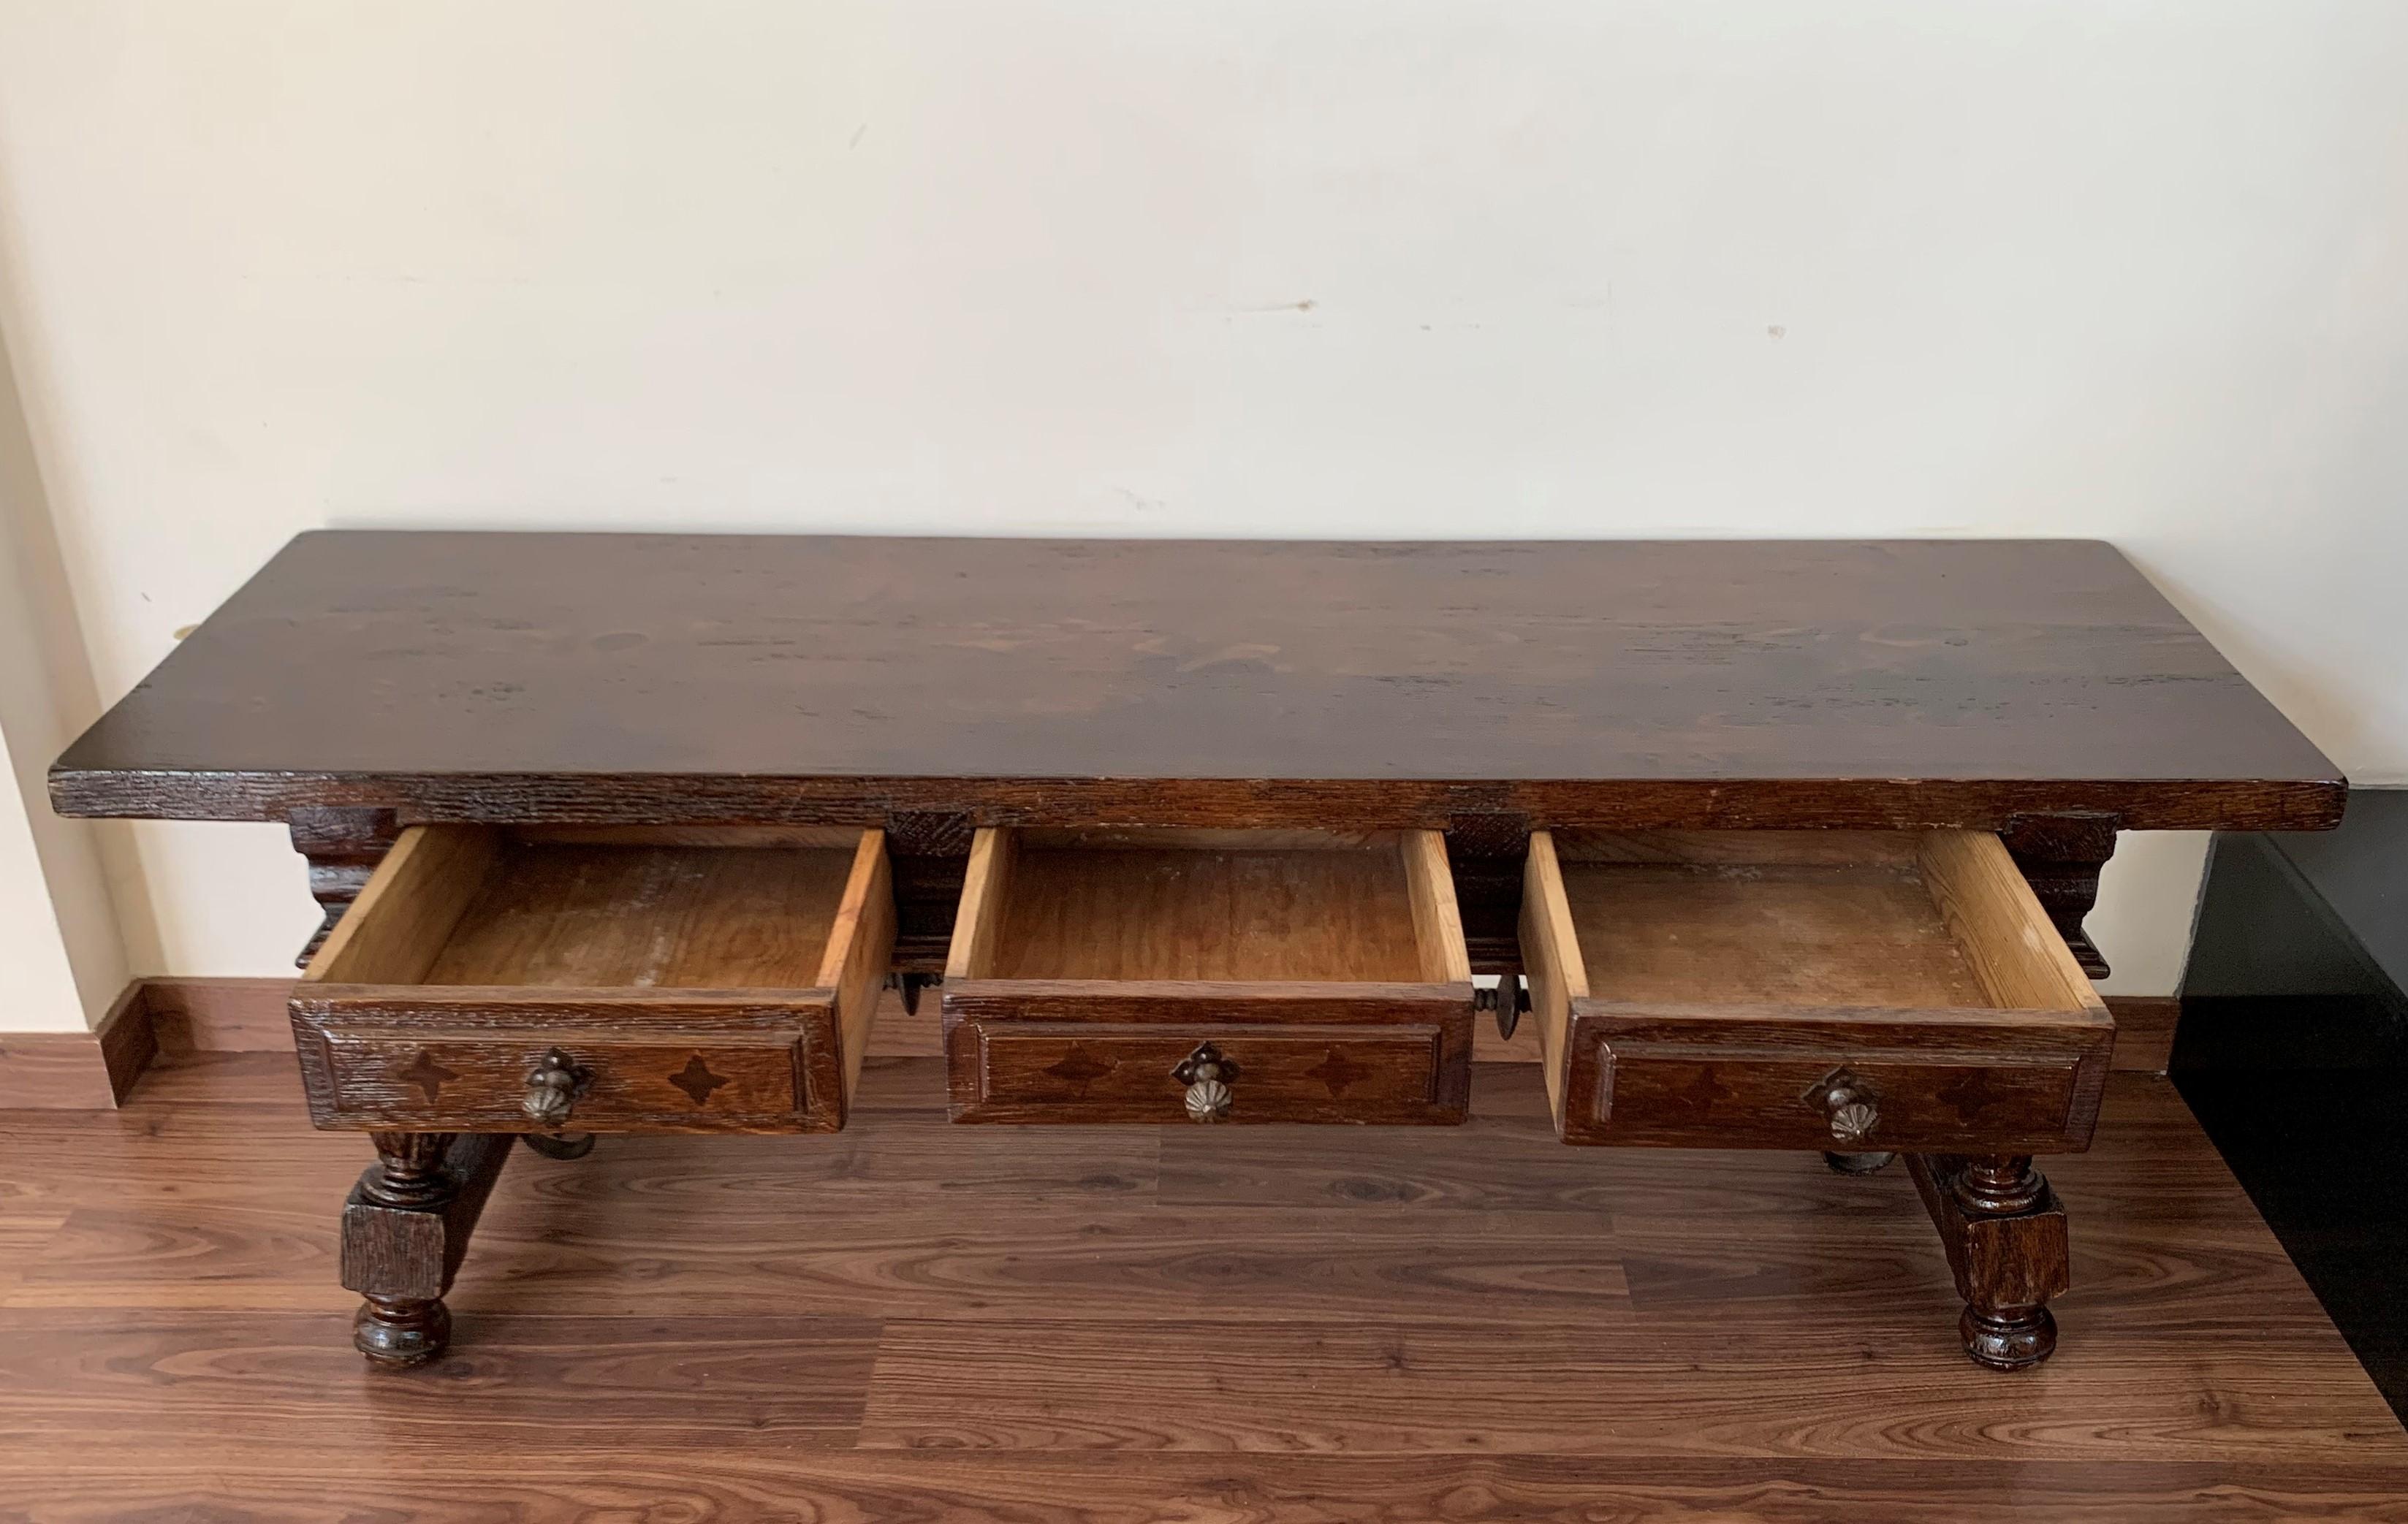 19th Century Spanish Bench or Low Console Table with Marquetry Drawers and Iron Stretcher